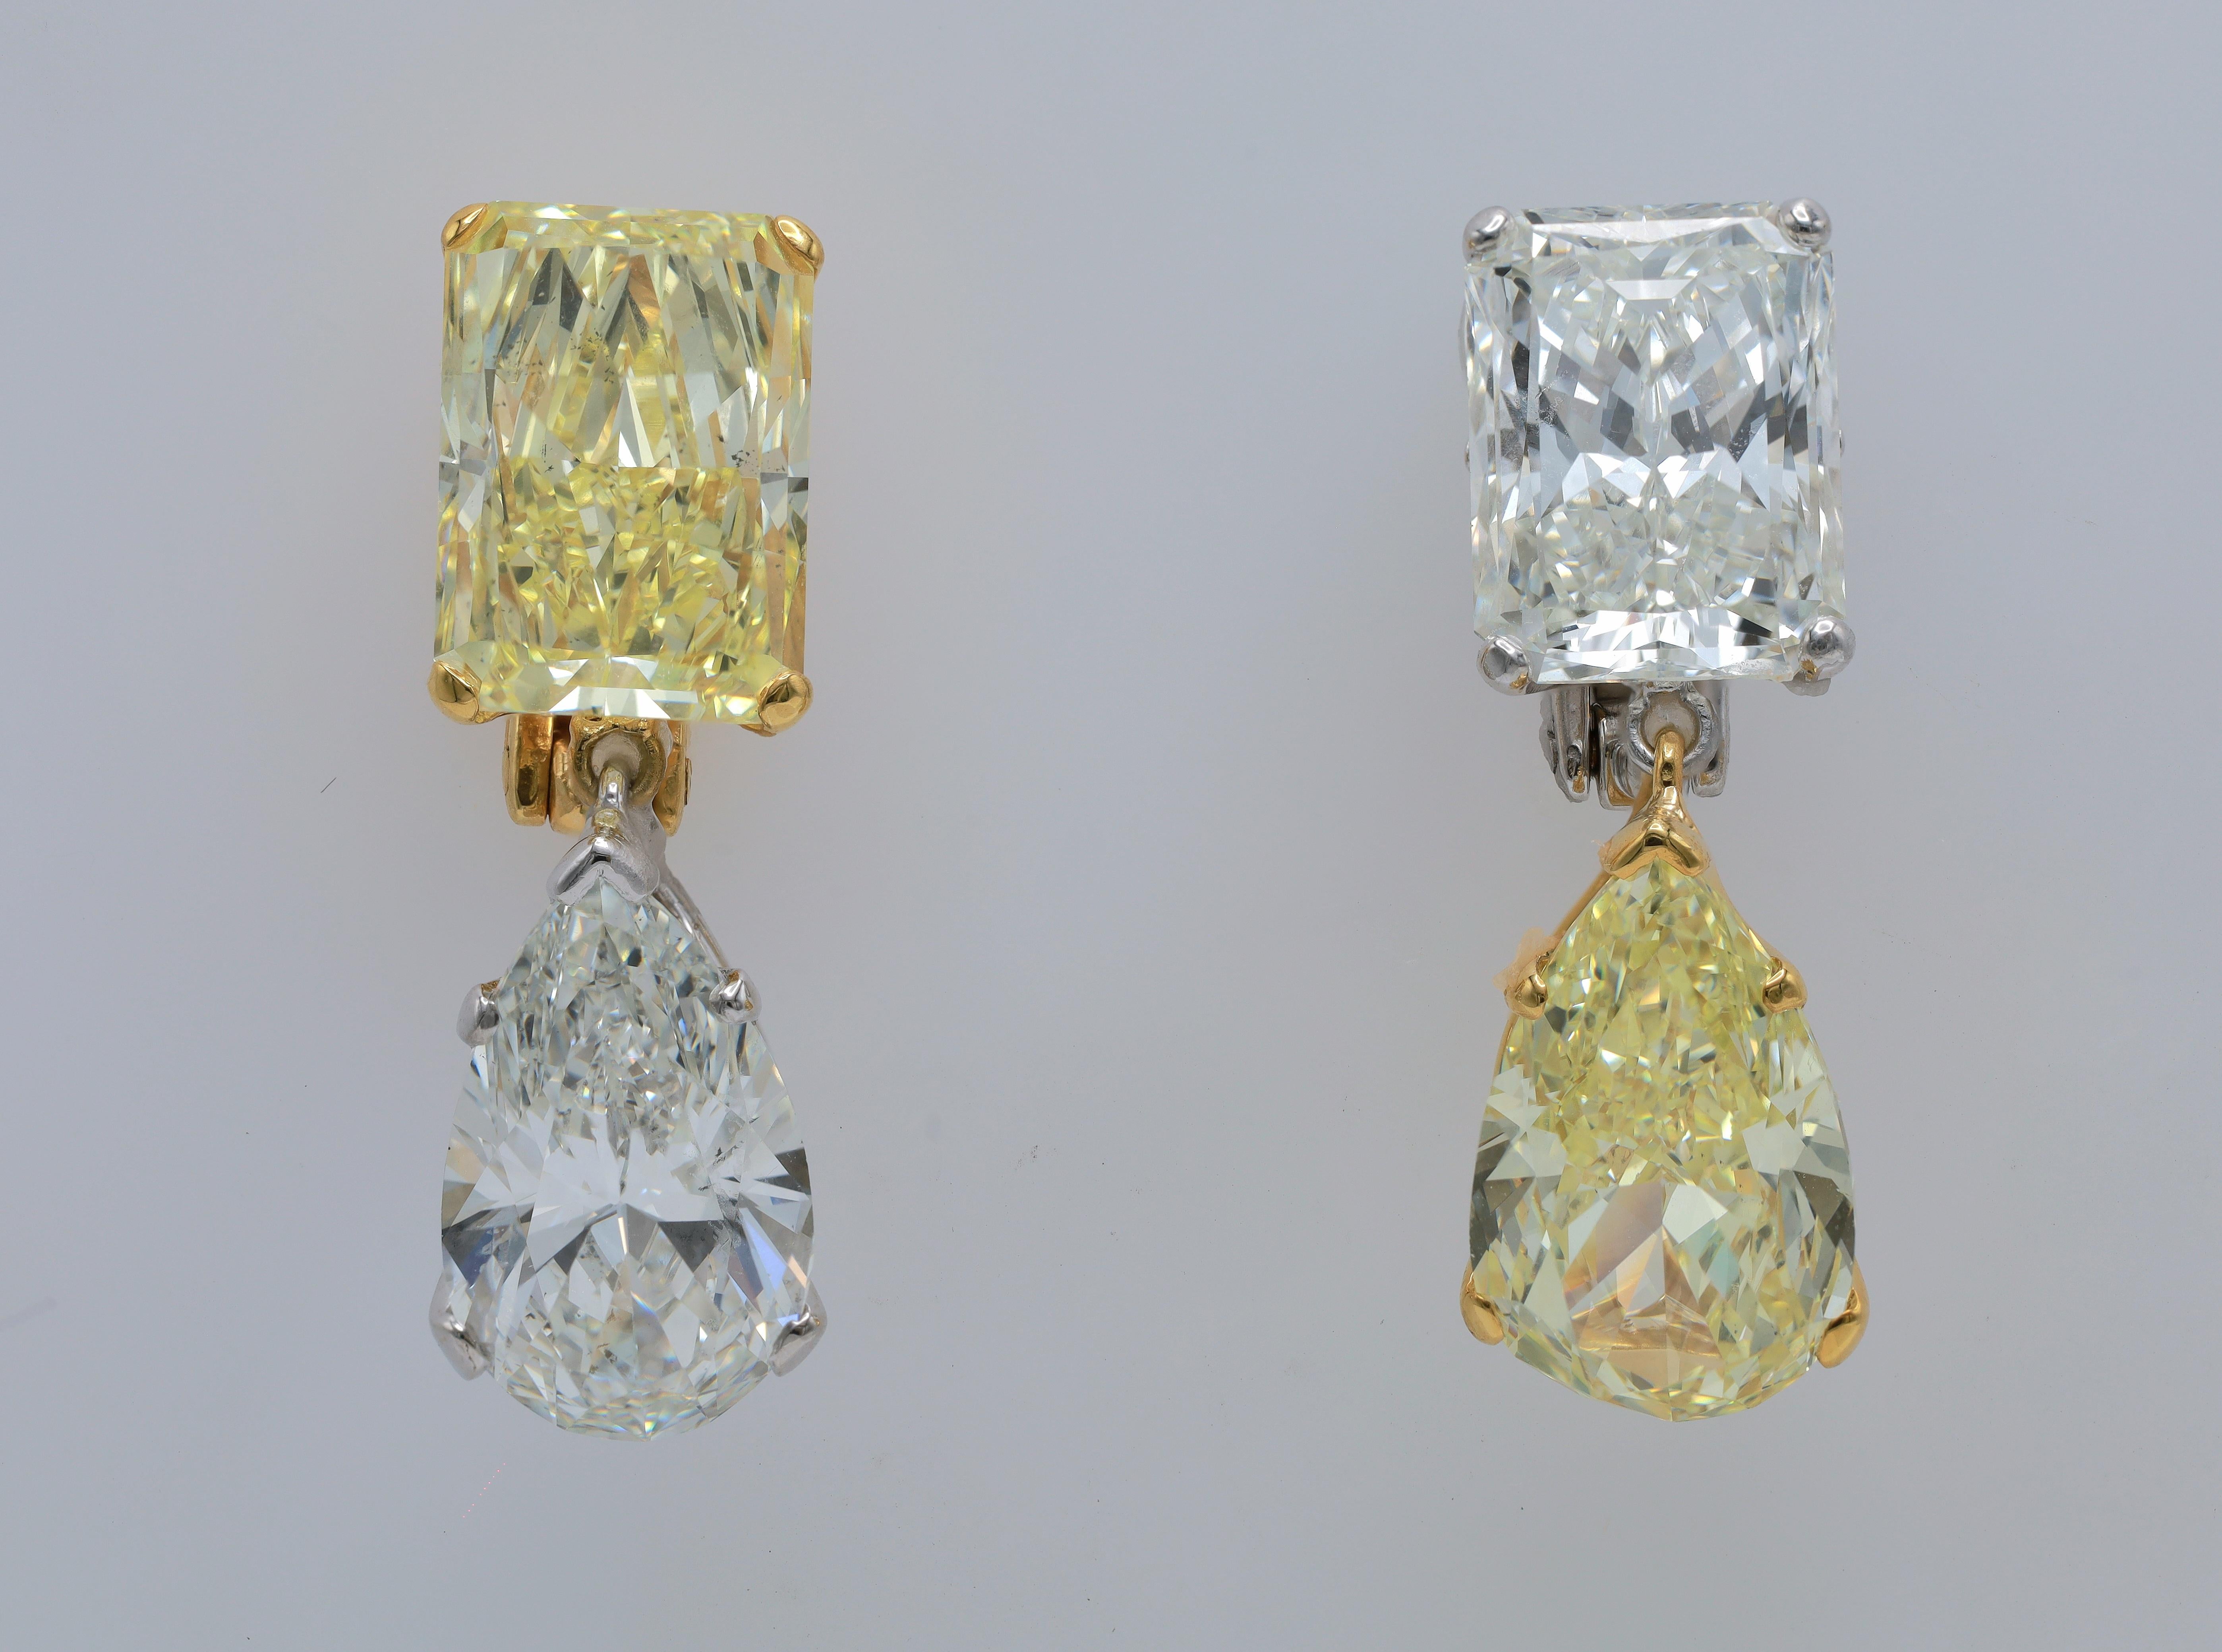 18 kt white and yellow gold drop earrings featuring a 5.22 ct radiant cut white diamond (I-VS2) and a 5.08 ct (I-SI1) pear shaped diamond hanging from it and a second earring with a 5.04 ct fancy yellow VS2 diamond and a 6.06 ct Fancy Yellow SI1